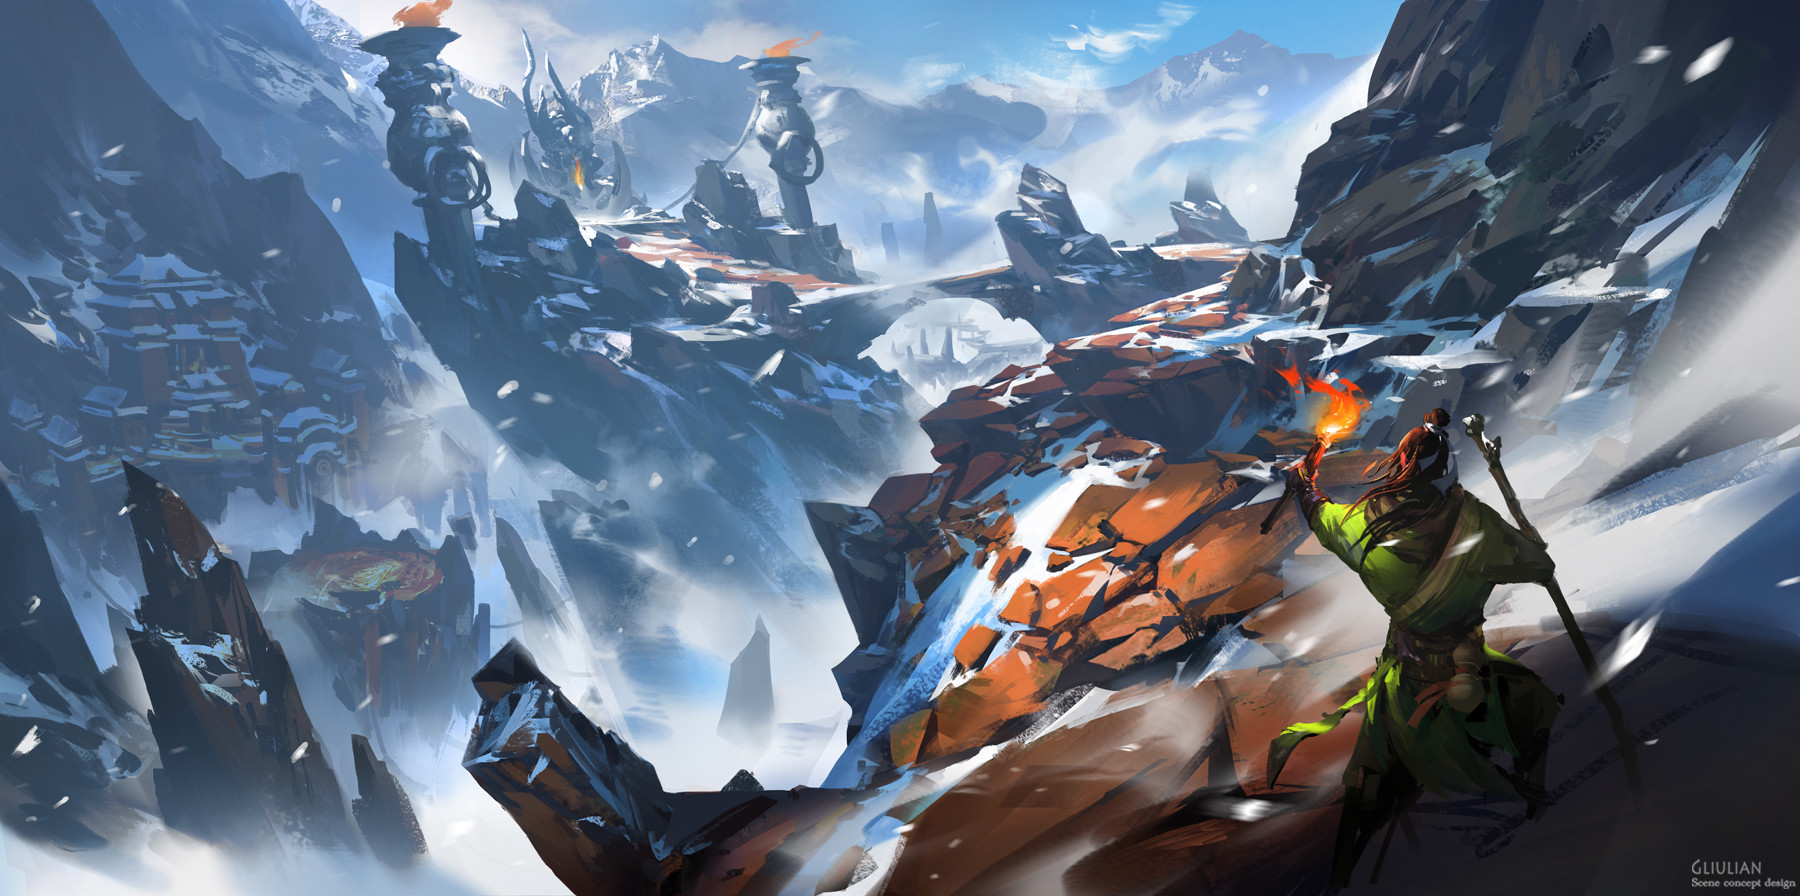 G Liulian digital painting concept art mage in snow mountain